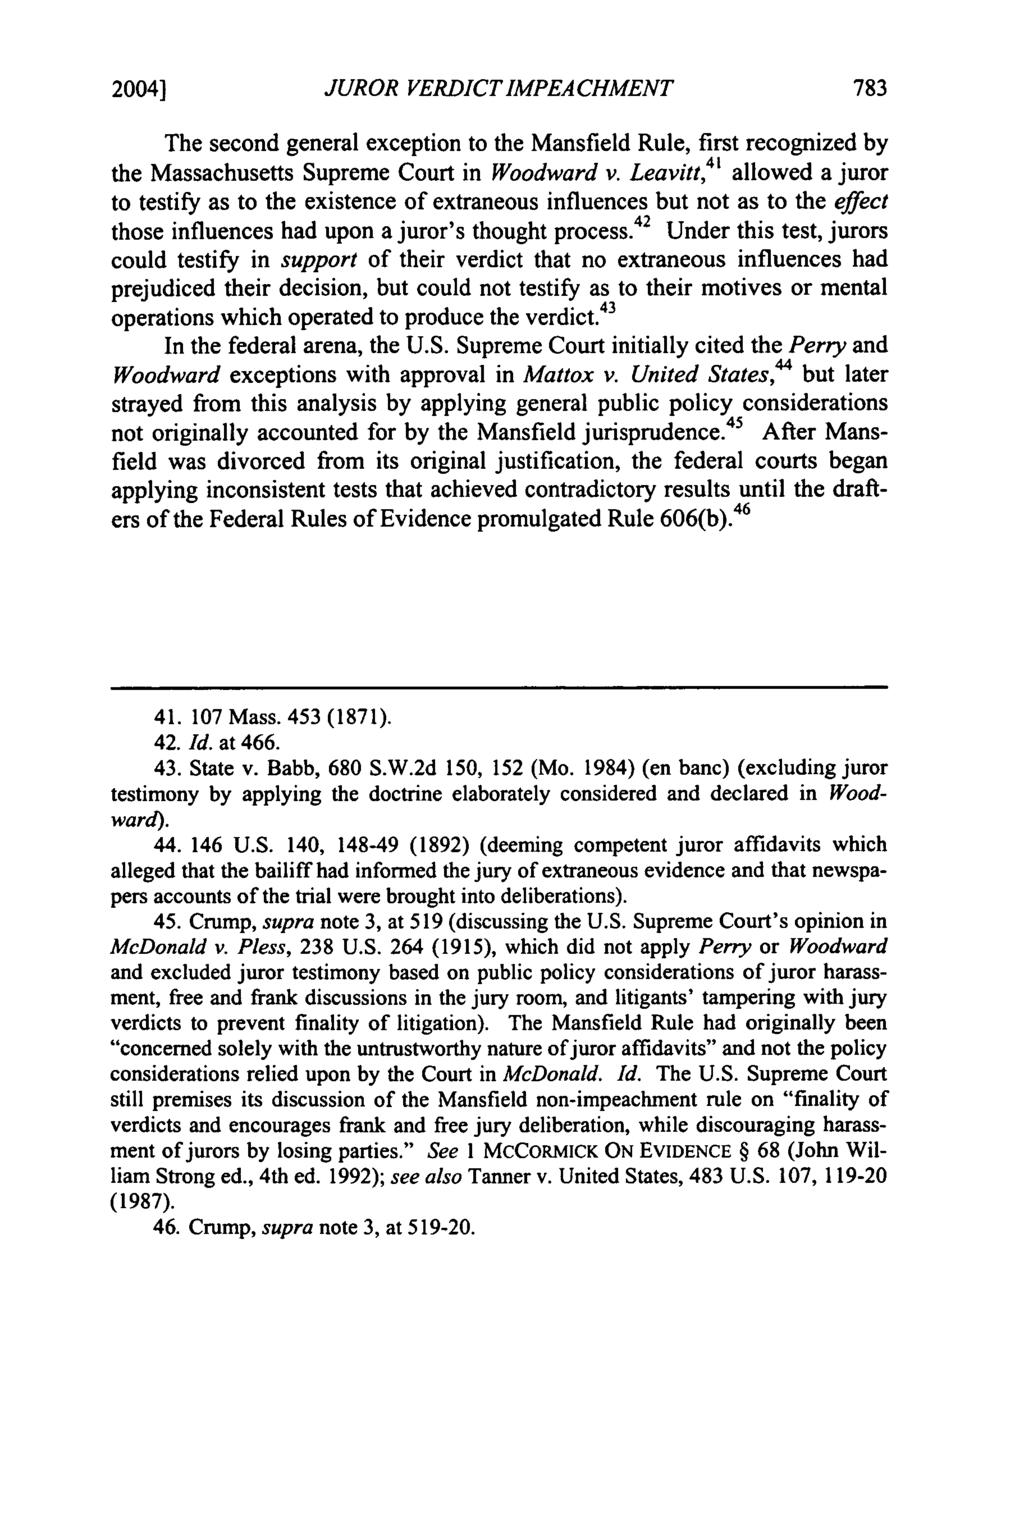 2004] Mudd: Mudd: Liberalizing the Mansfield Rule in Missouri: JUROR VERDICTIMPEACHMENT The second general exception to the Mansfield Rule, first recognized by the Massachusetts Supreme Court in